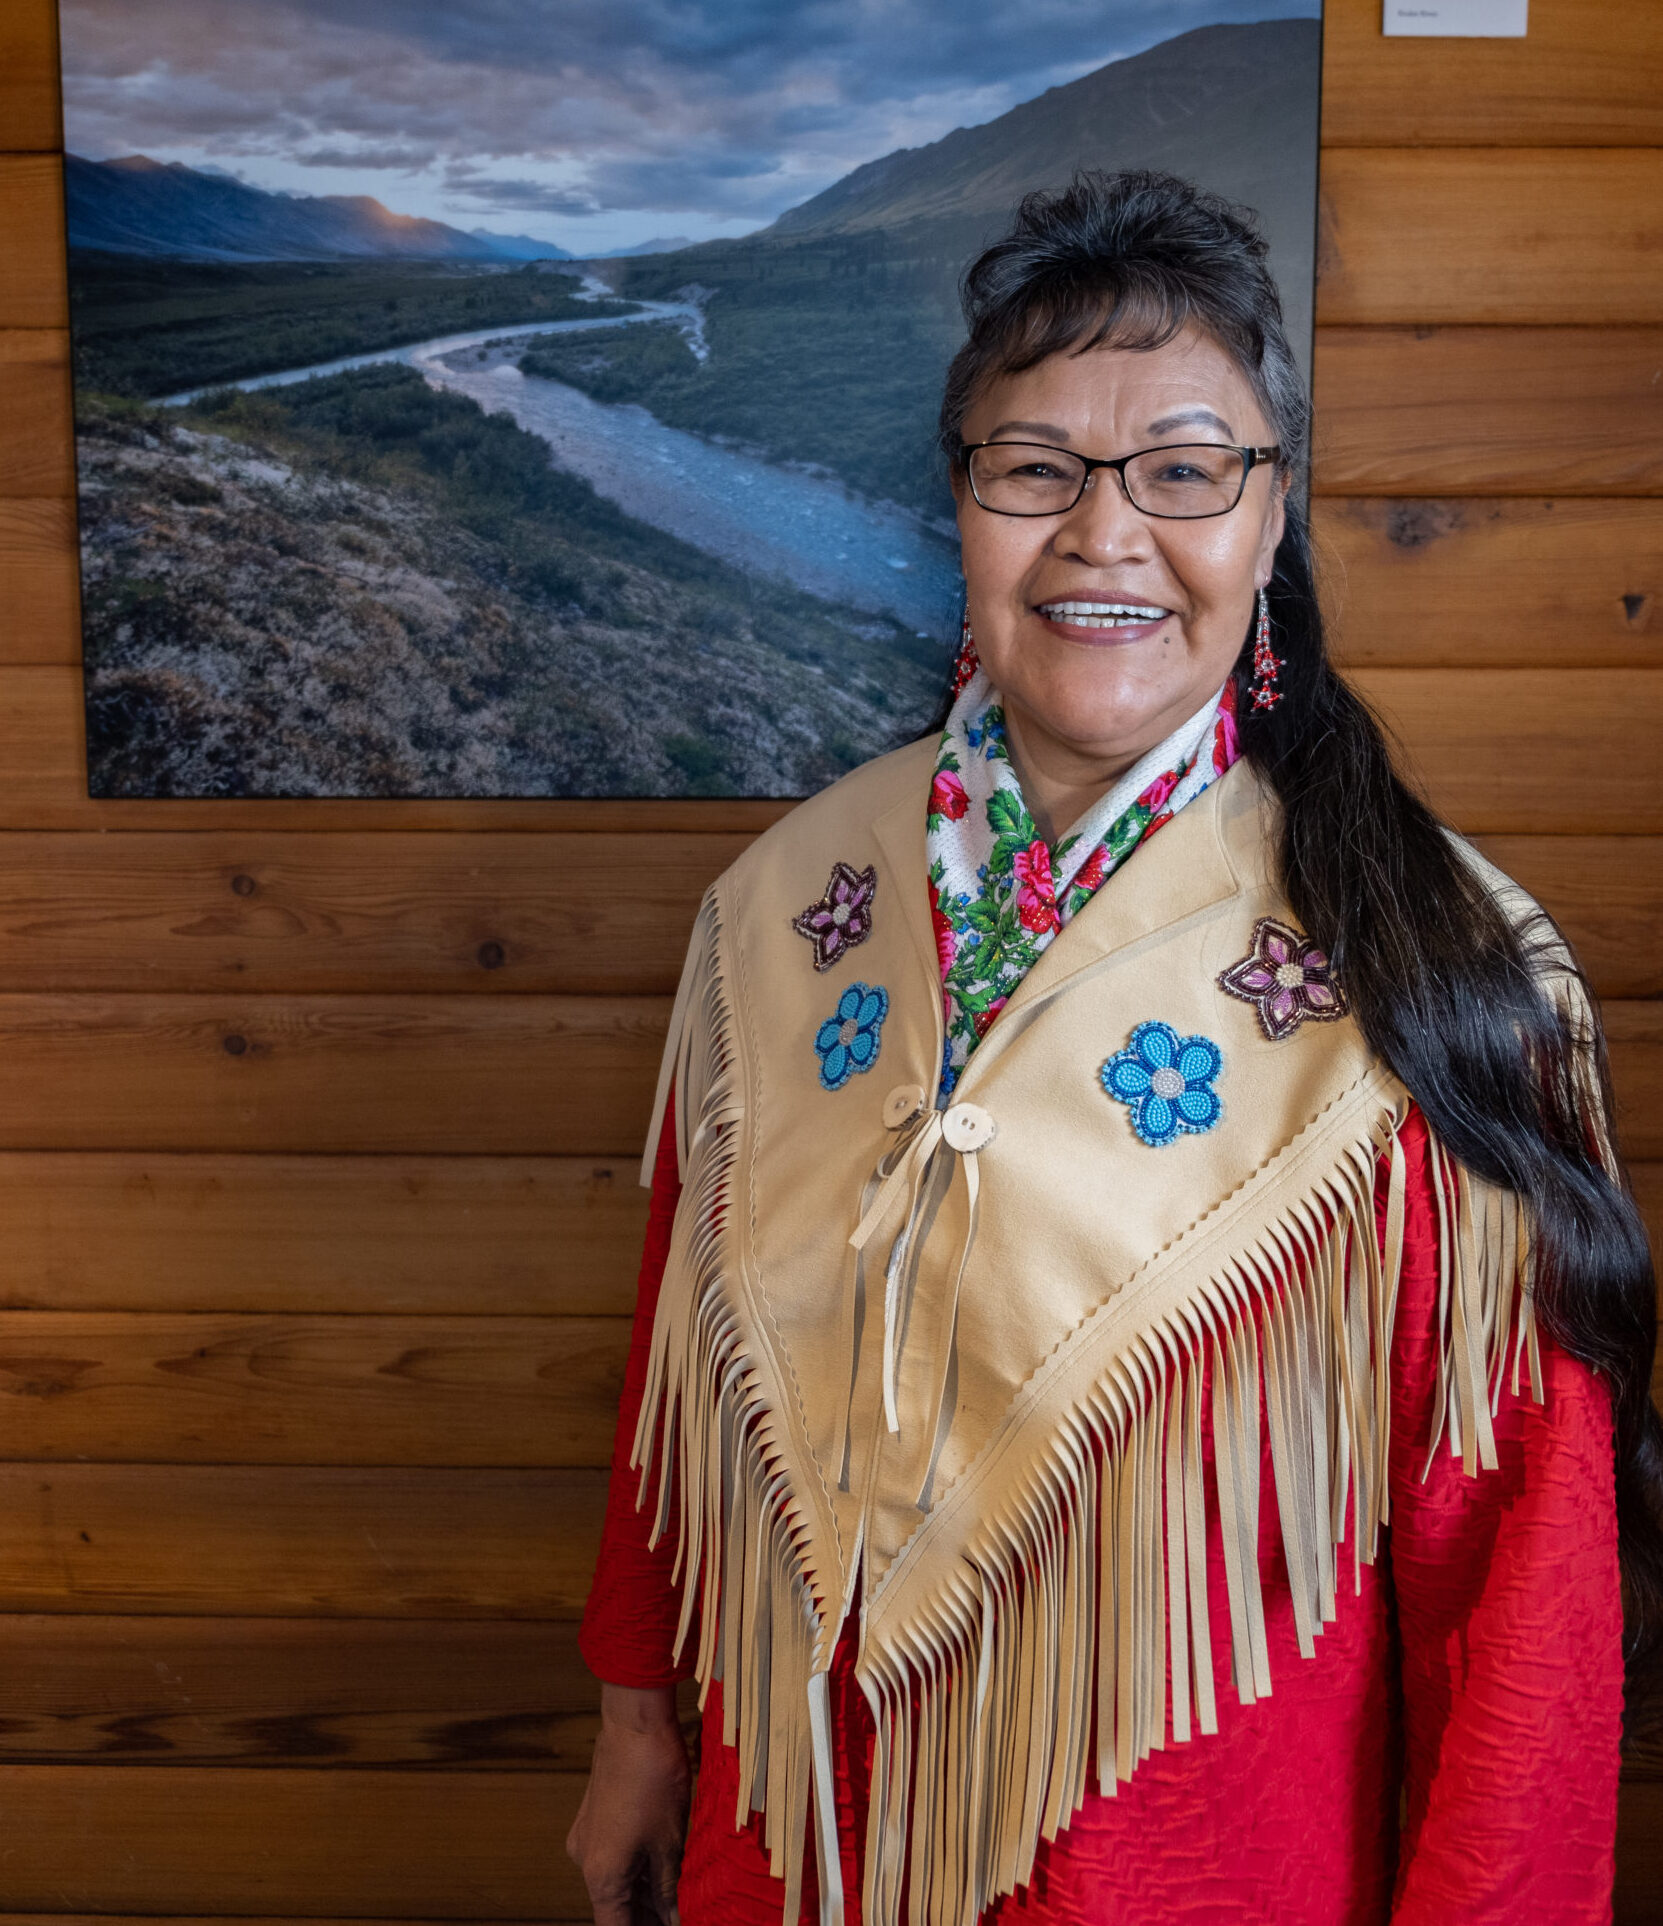 Smiling Indigenous woman in traditional beaded leather shawl stands beside a photo of the Yukon landscape